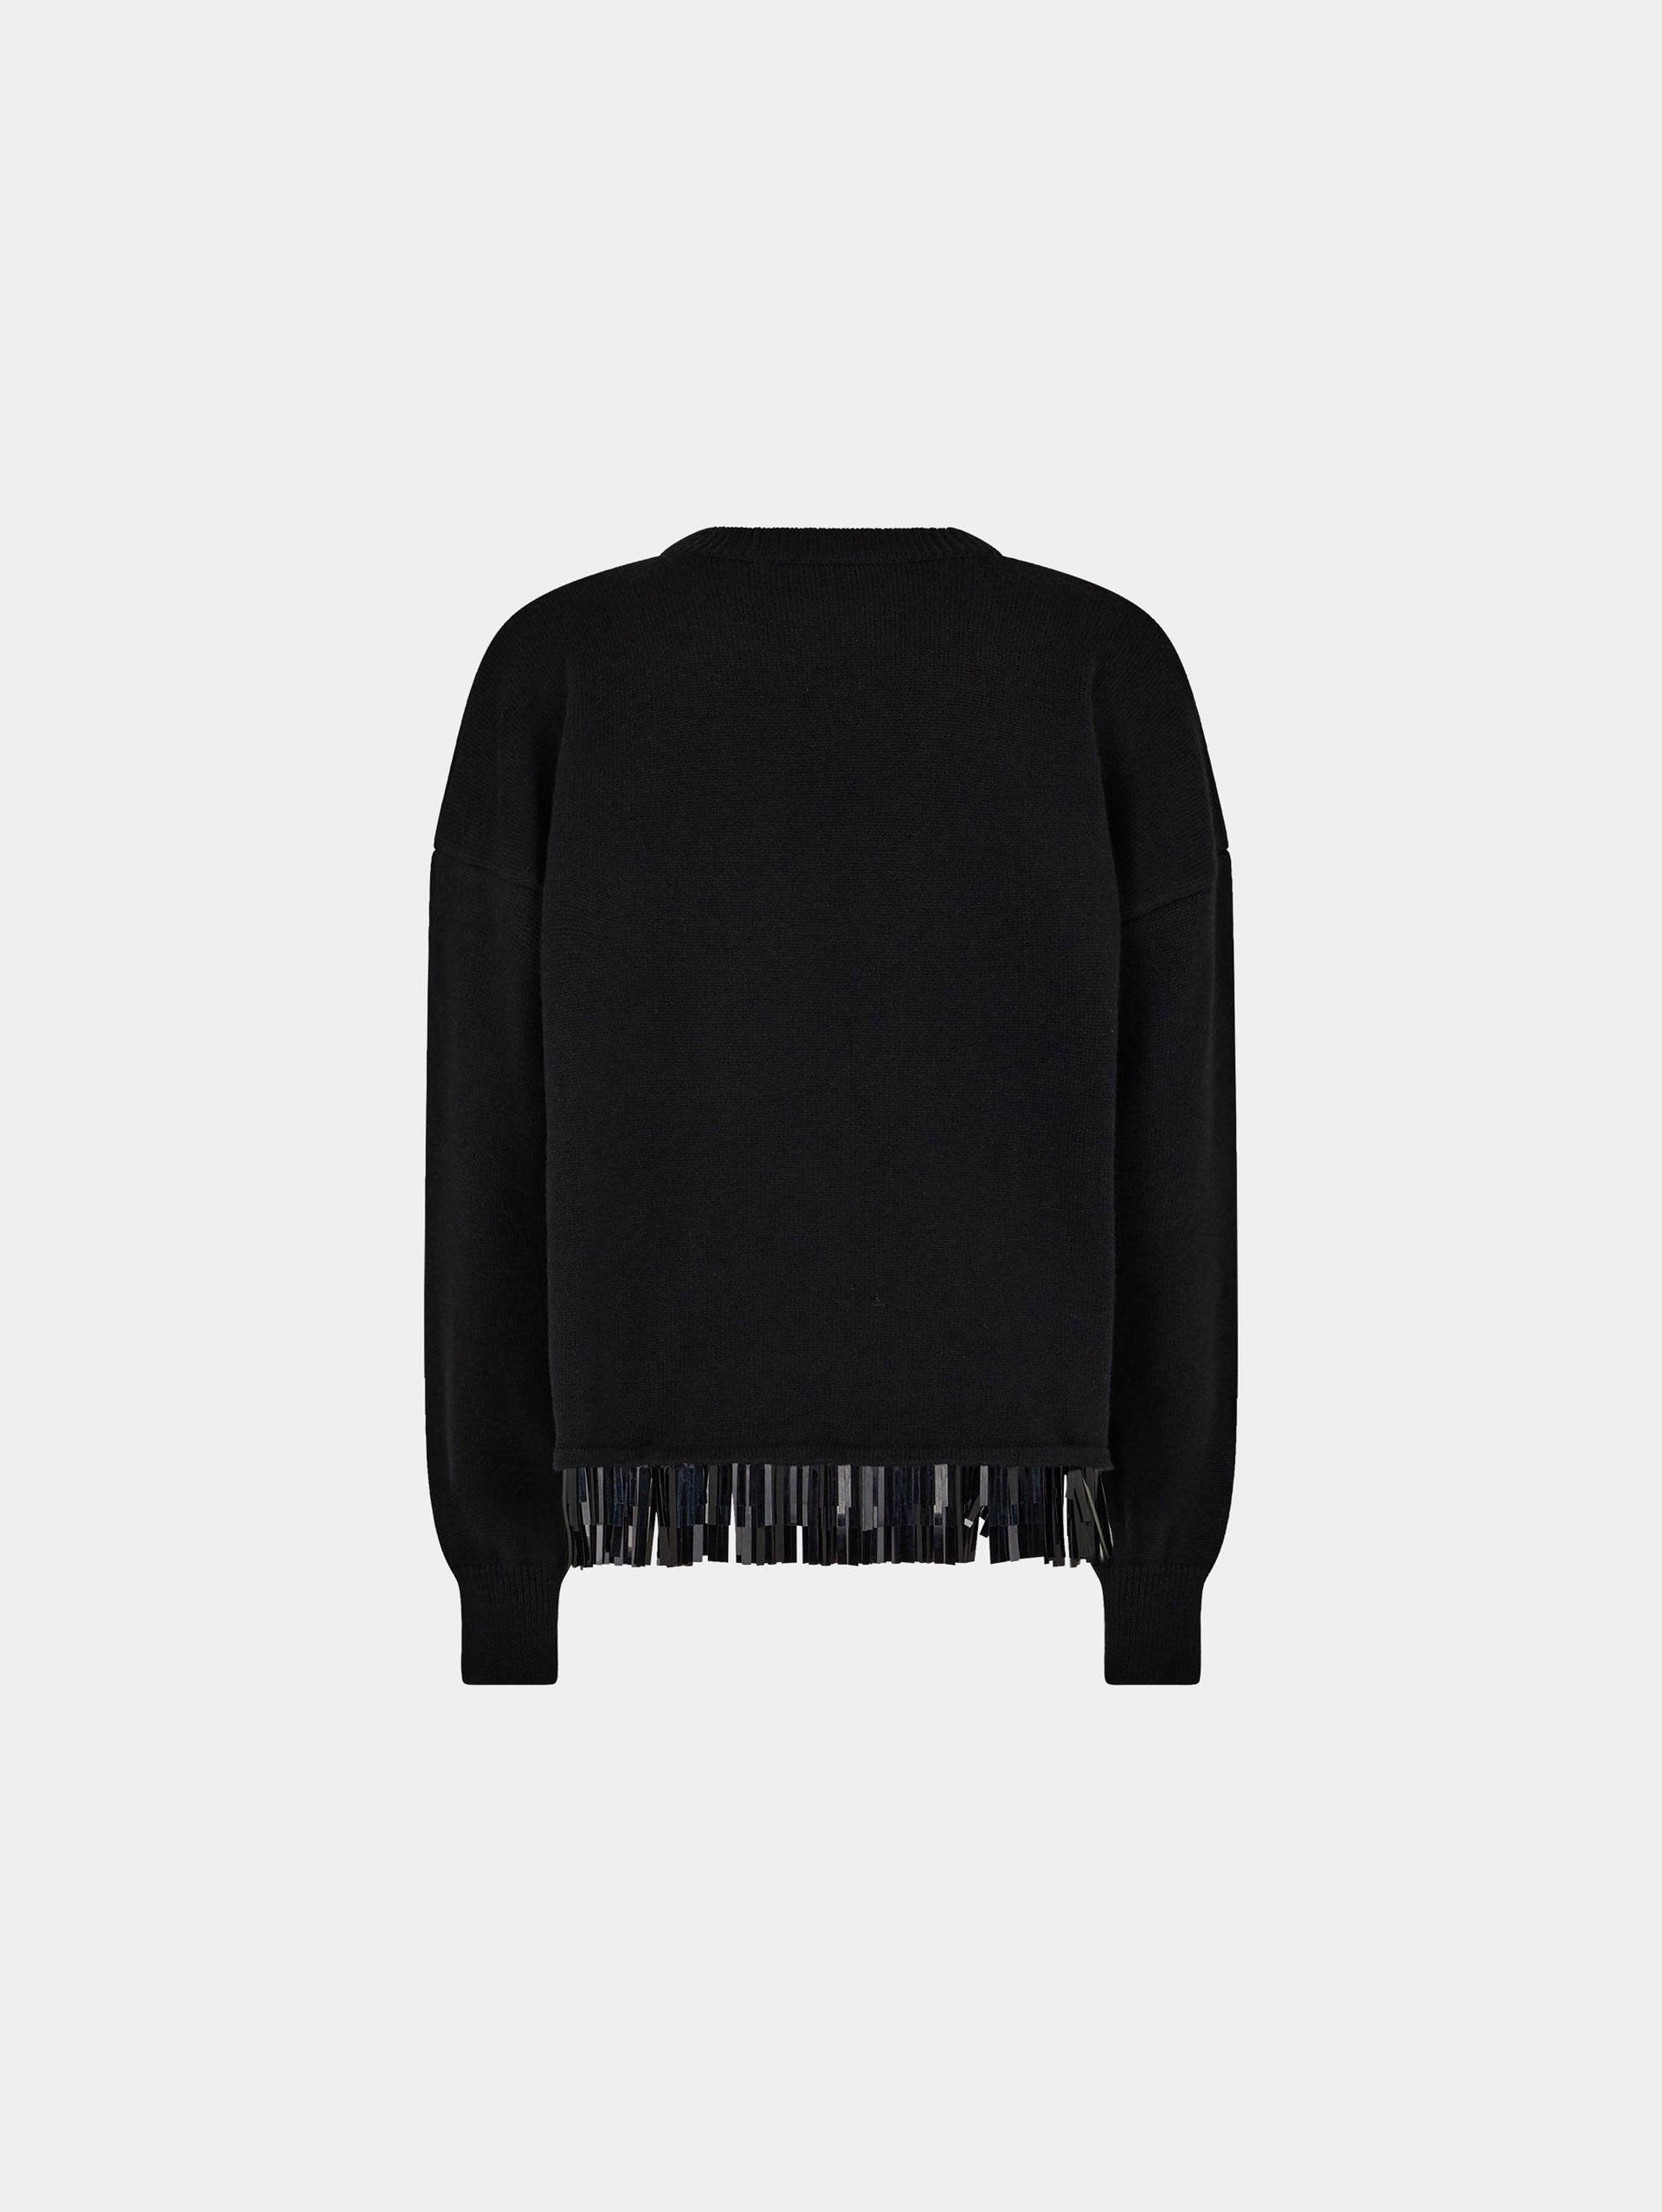 Black wool and cashmere sweater | Rabanne